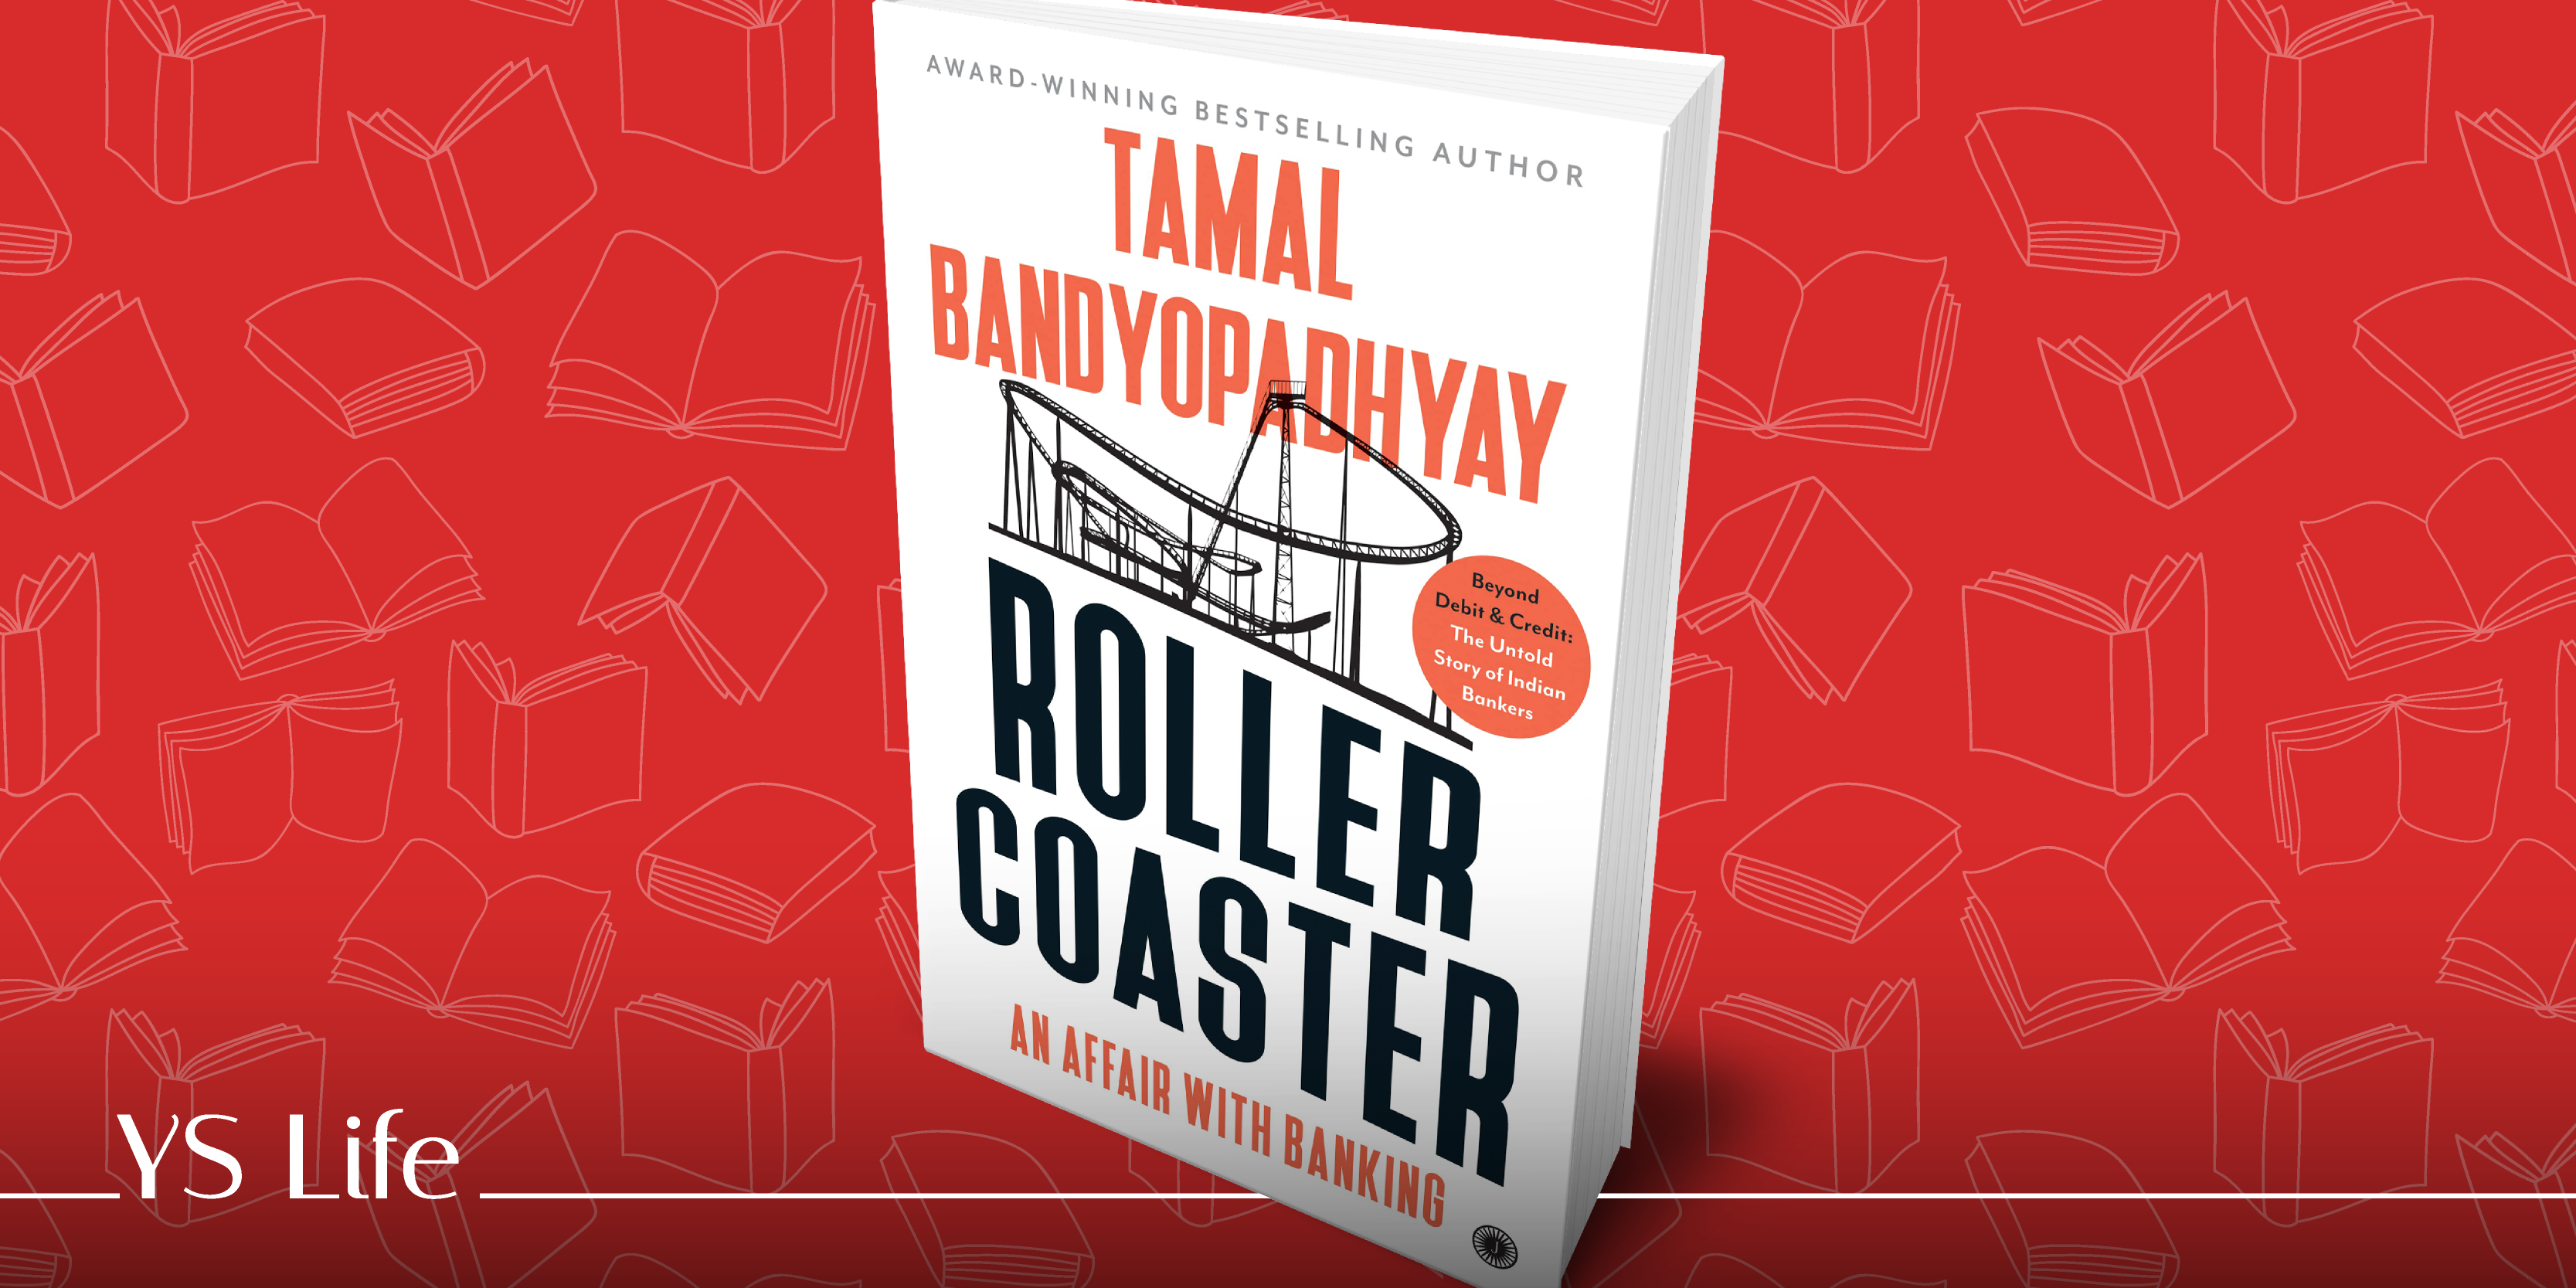 Get up close and personal with India’s biggest banking men and women in Tamal Bandyopadhyay’s new book